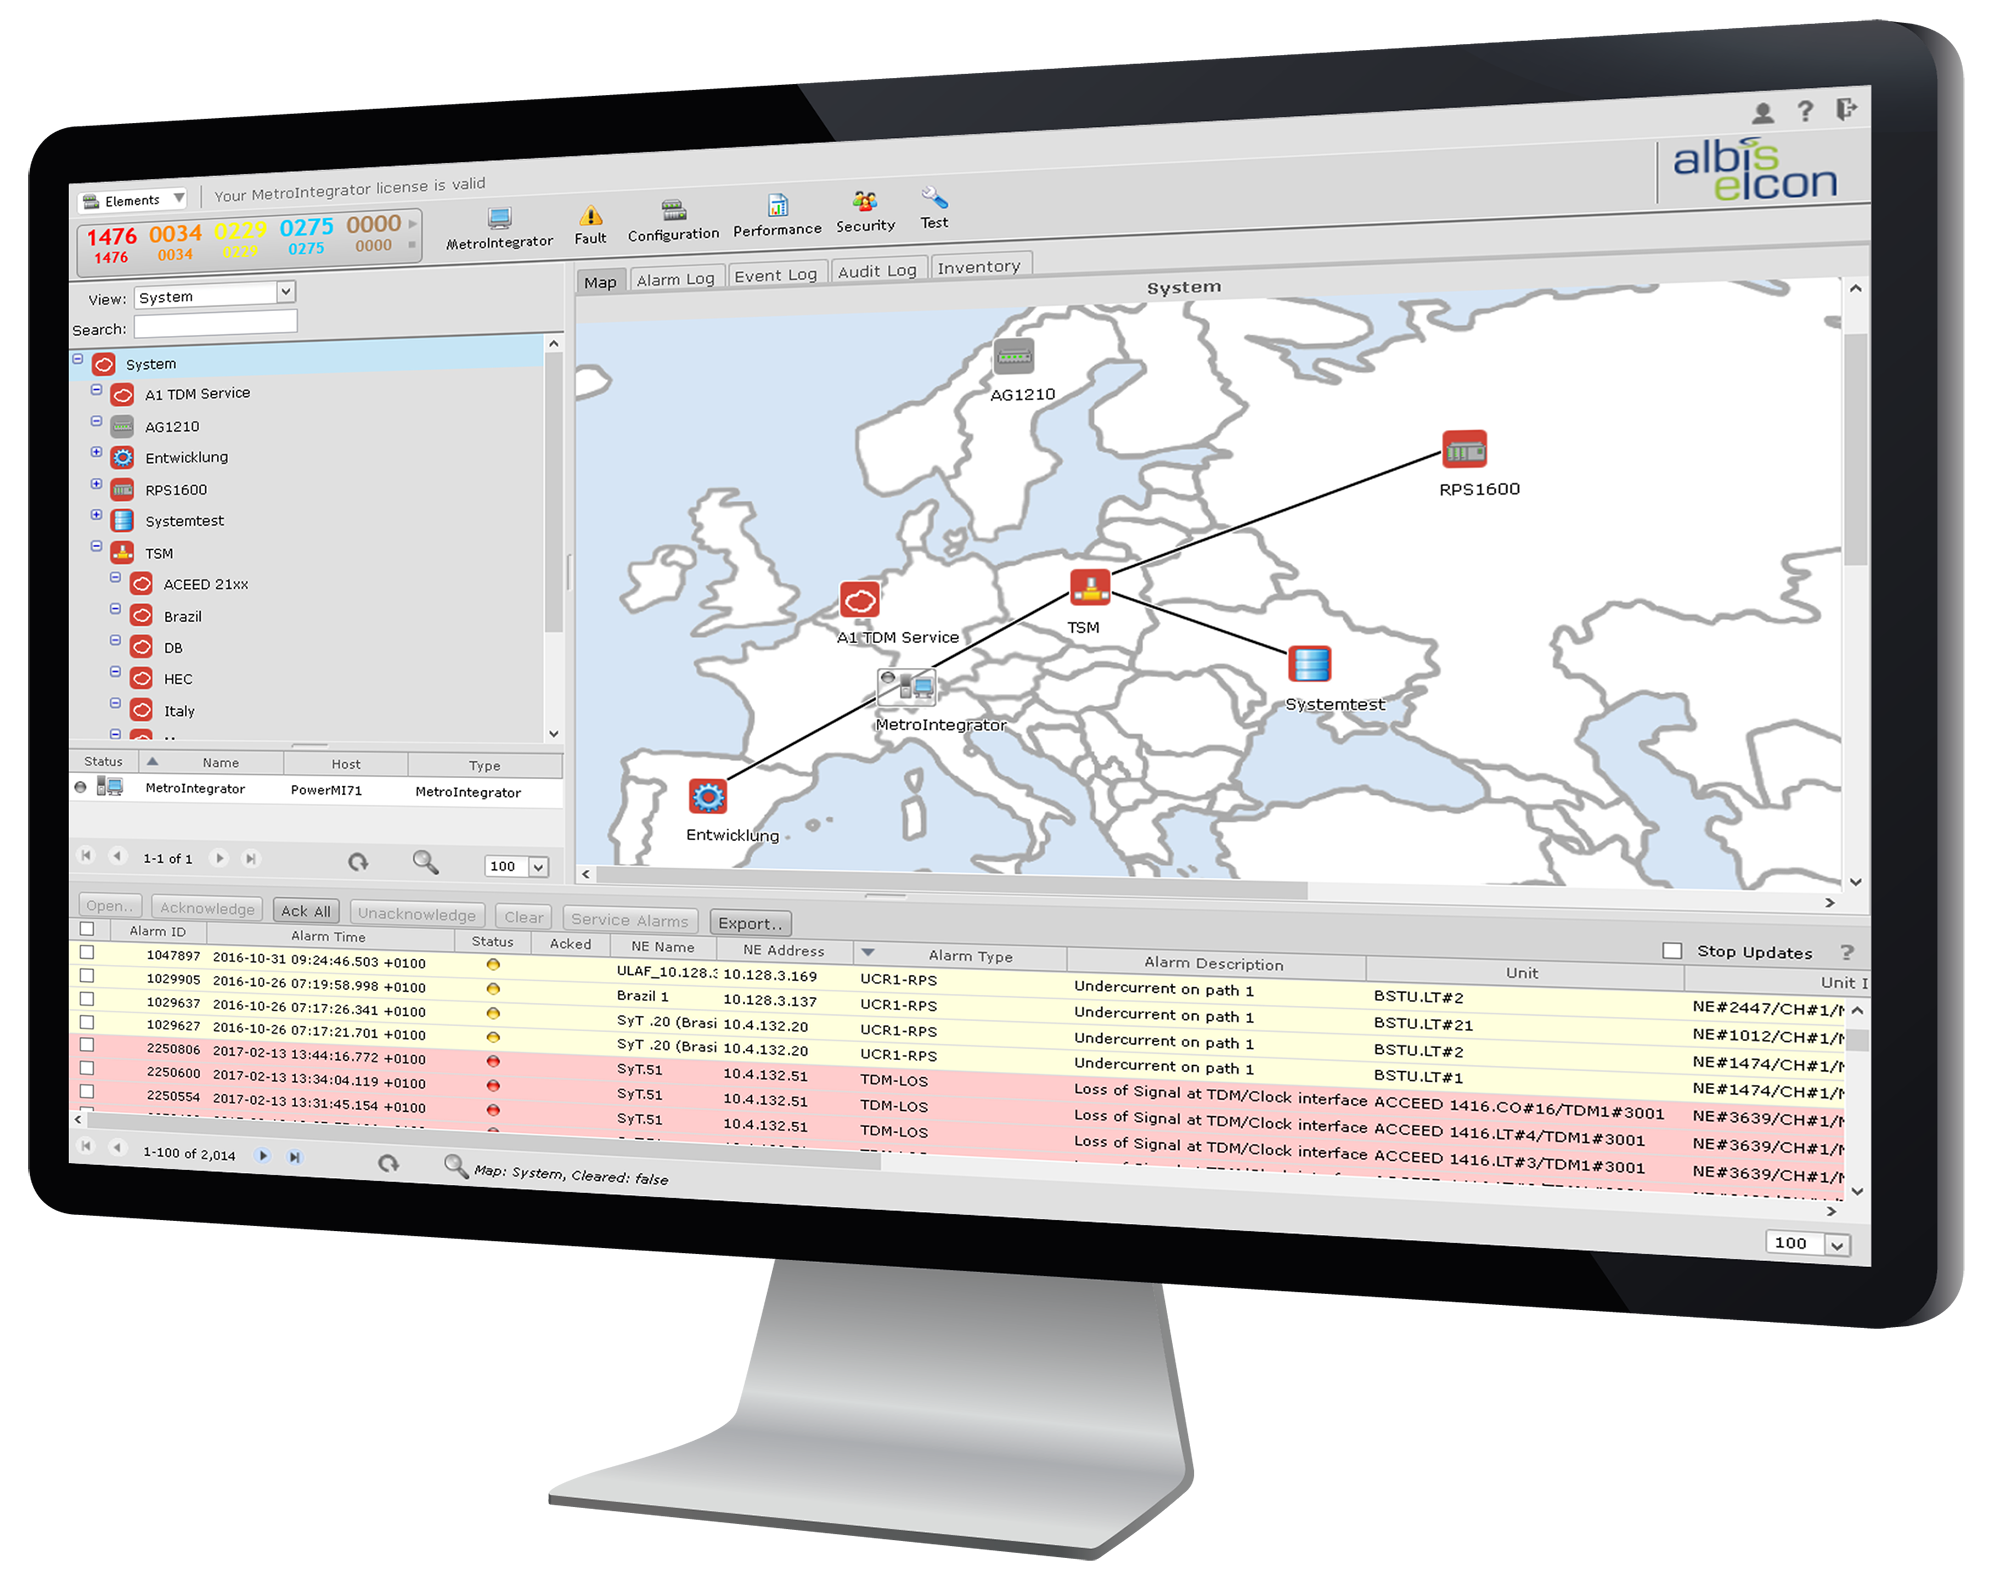 albis-elcon - MetroIntegrator: Network and Element Manager for the ULAF+ Access and Aggregation Platform